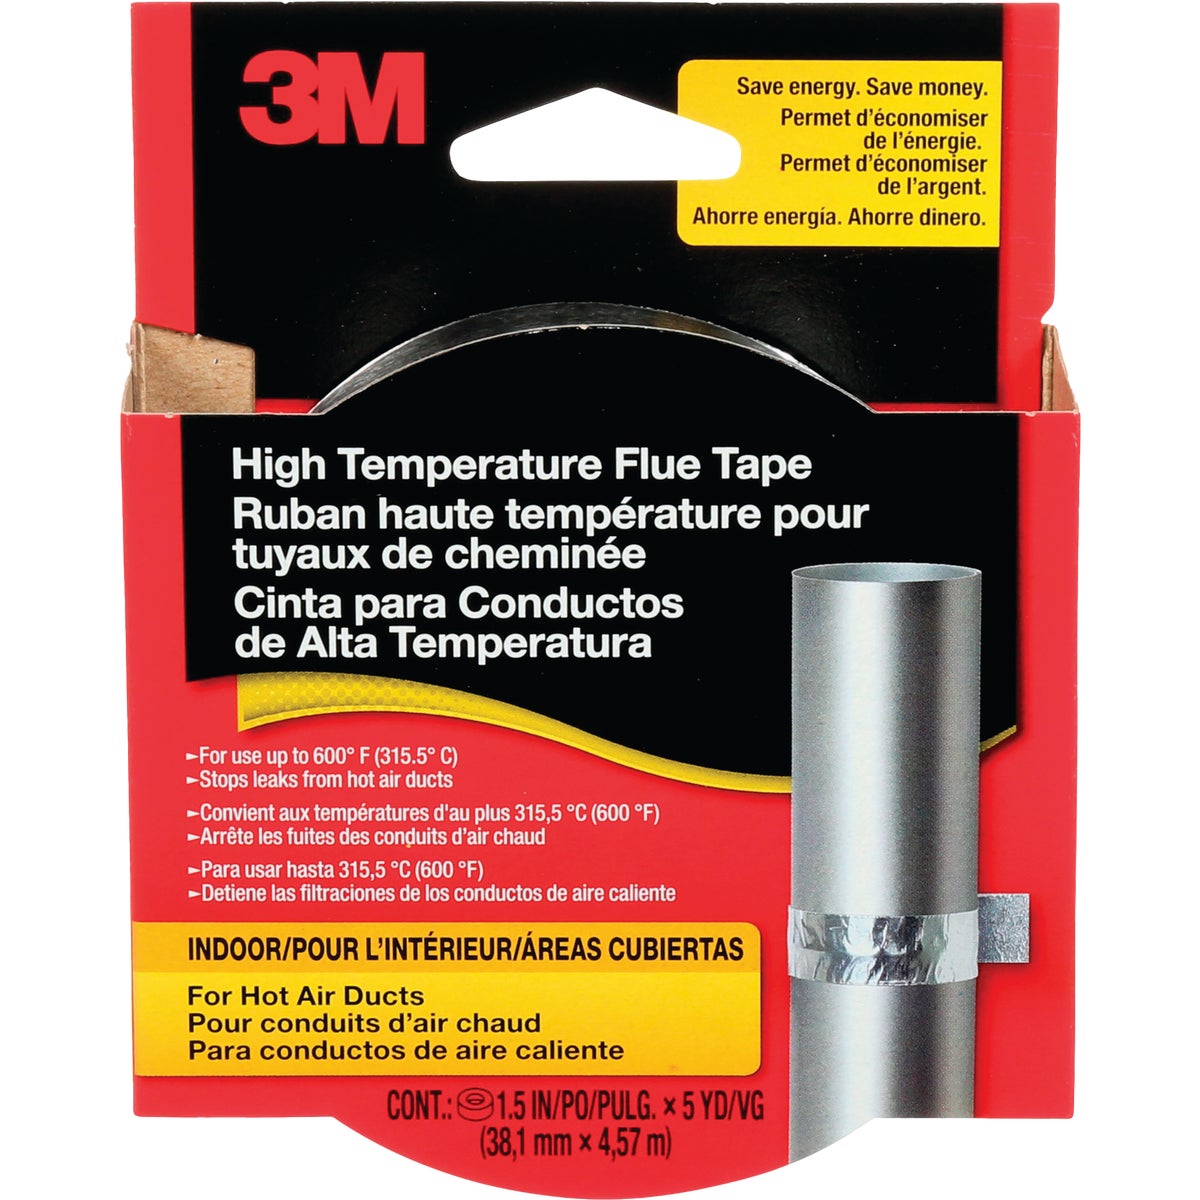 Item 455598, 3M High Temperature Flue Tape stops hot air leaks where they start the 